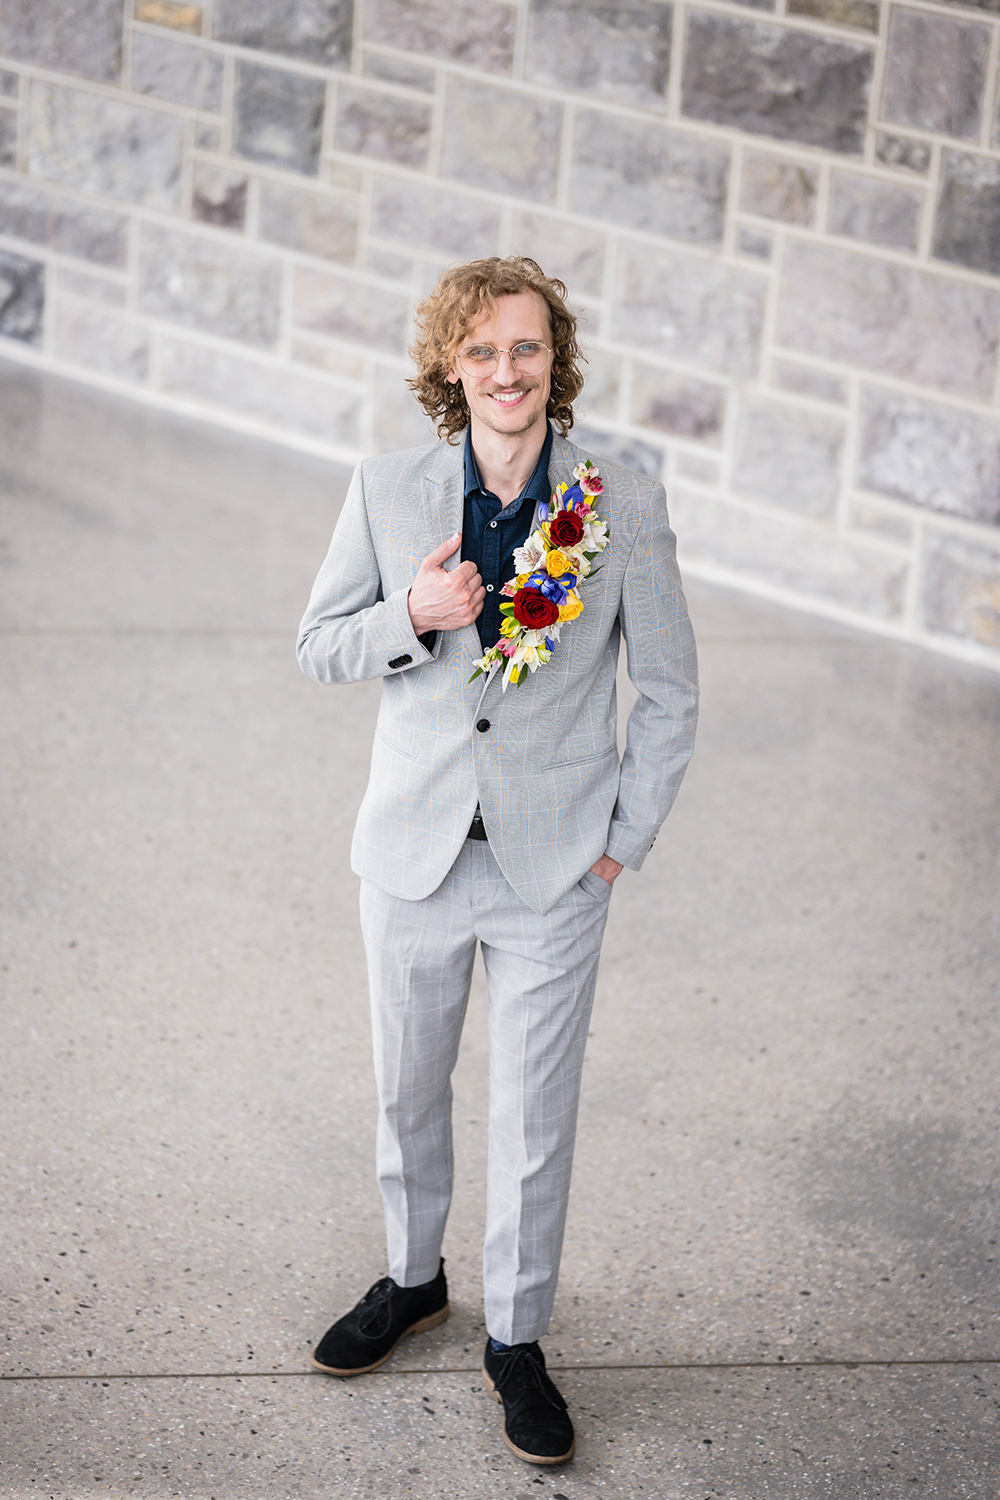 A groom wearing a gray suit with a floral lapel and navy shirt poses and smiles at the beginning of a stairwell inside of the Moss Arts Center.